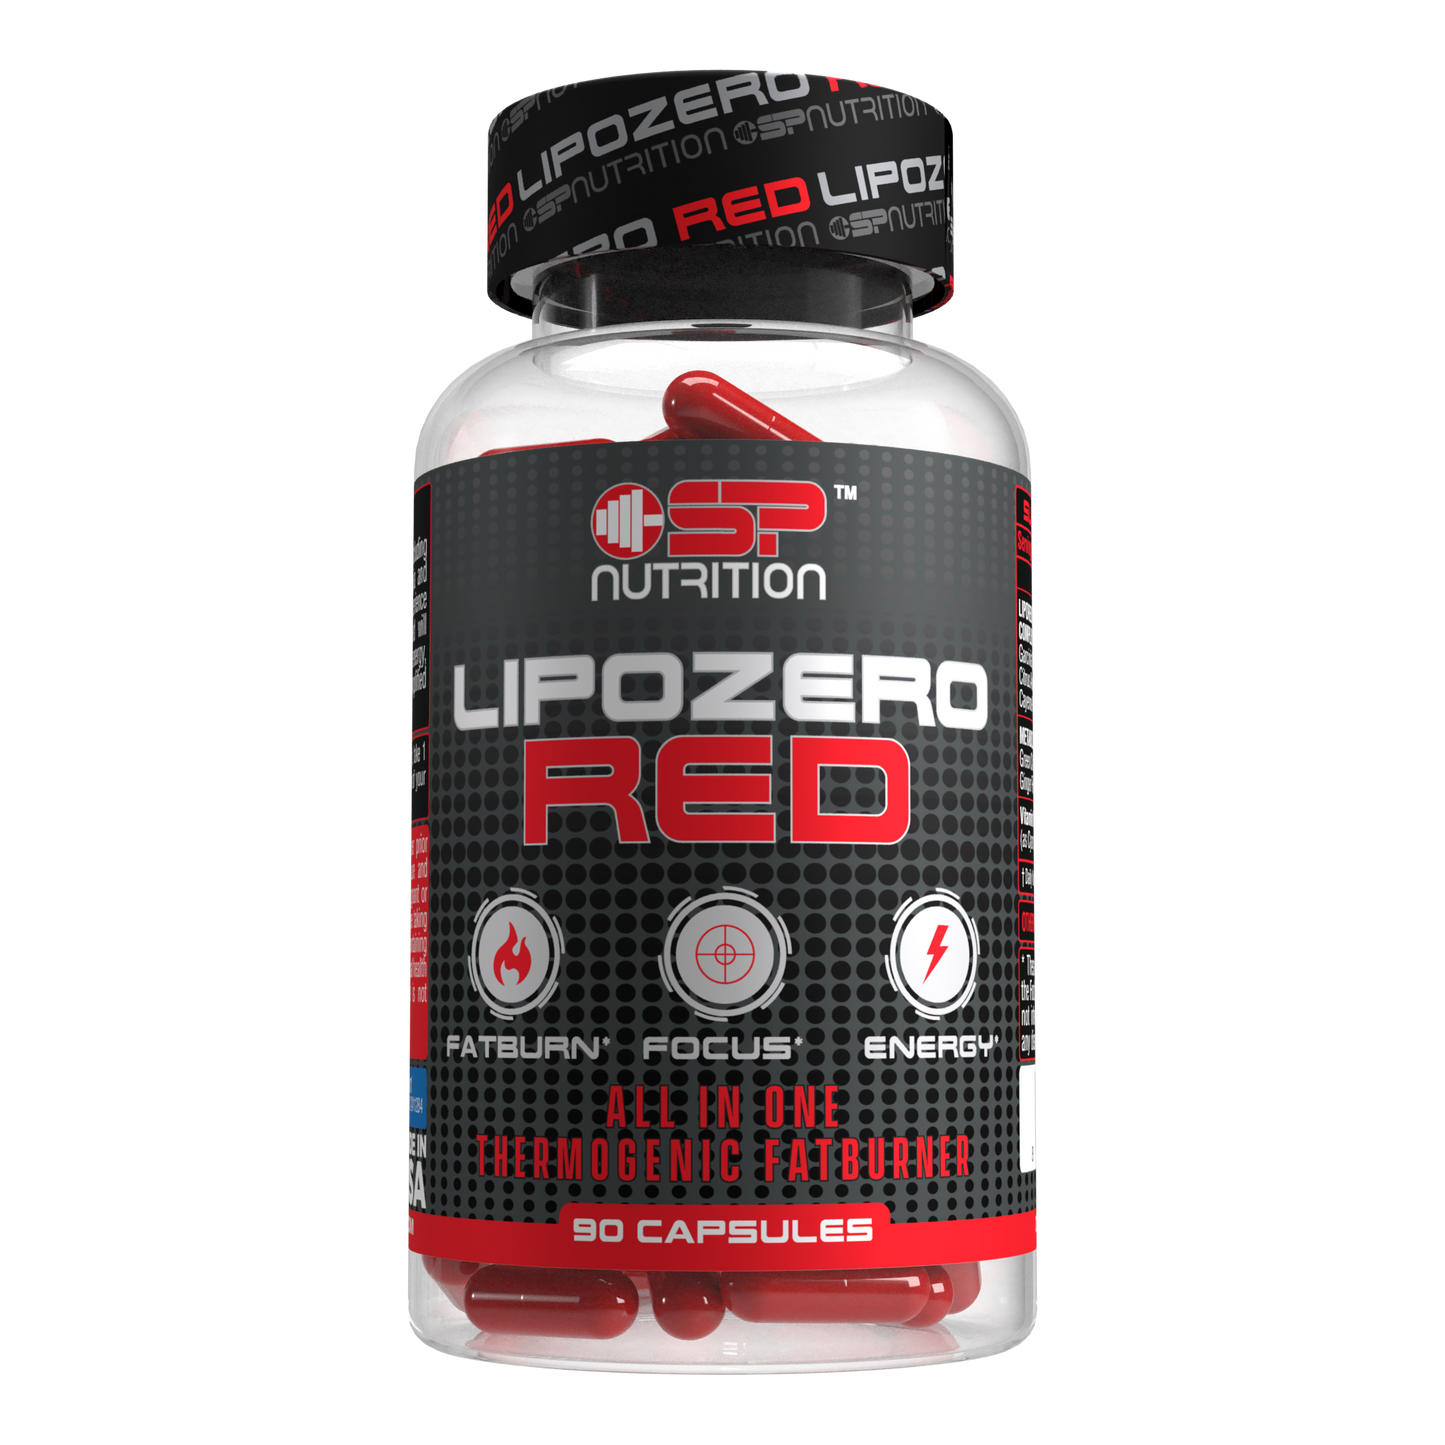 LIPOZERO RED Extreme Potency, Powerful Weight Loss Supplement, Appetite Suppressant, Energy Fat Burner Diet Pills, 90 Capsules